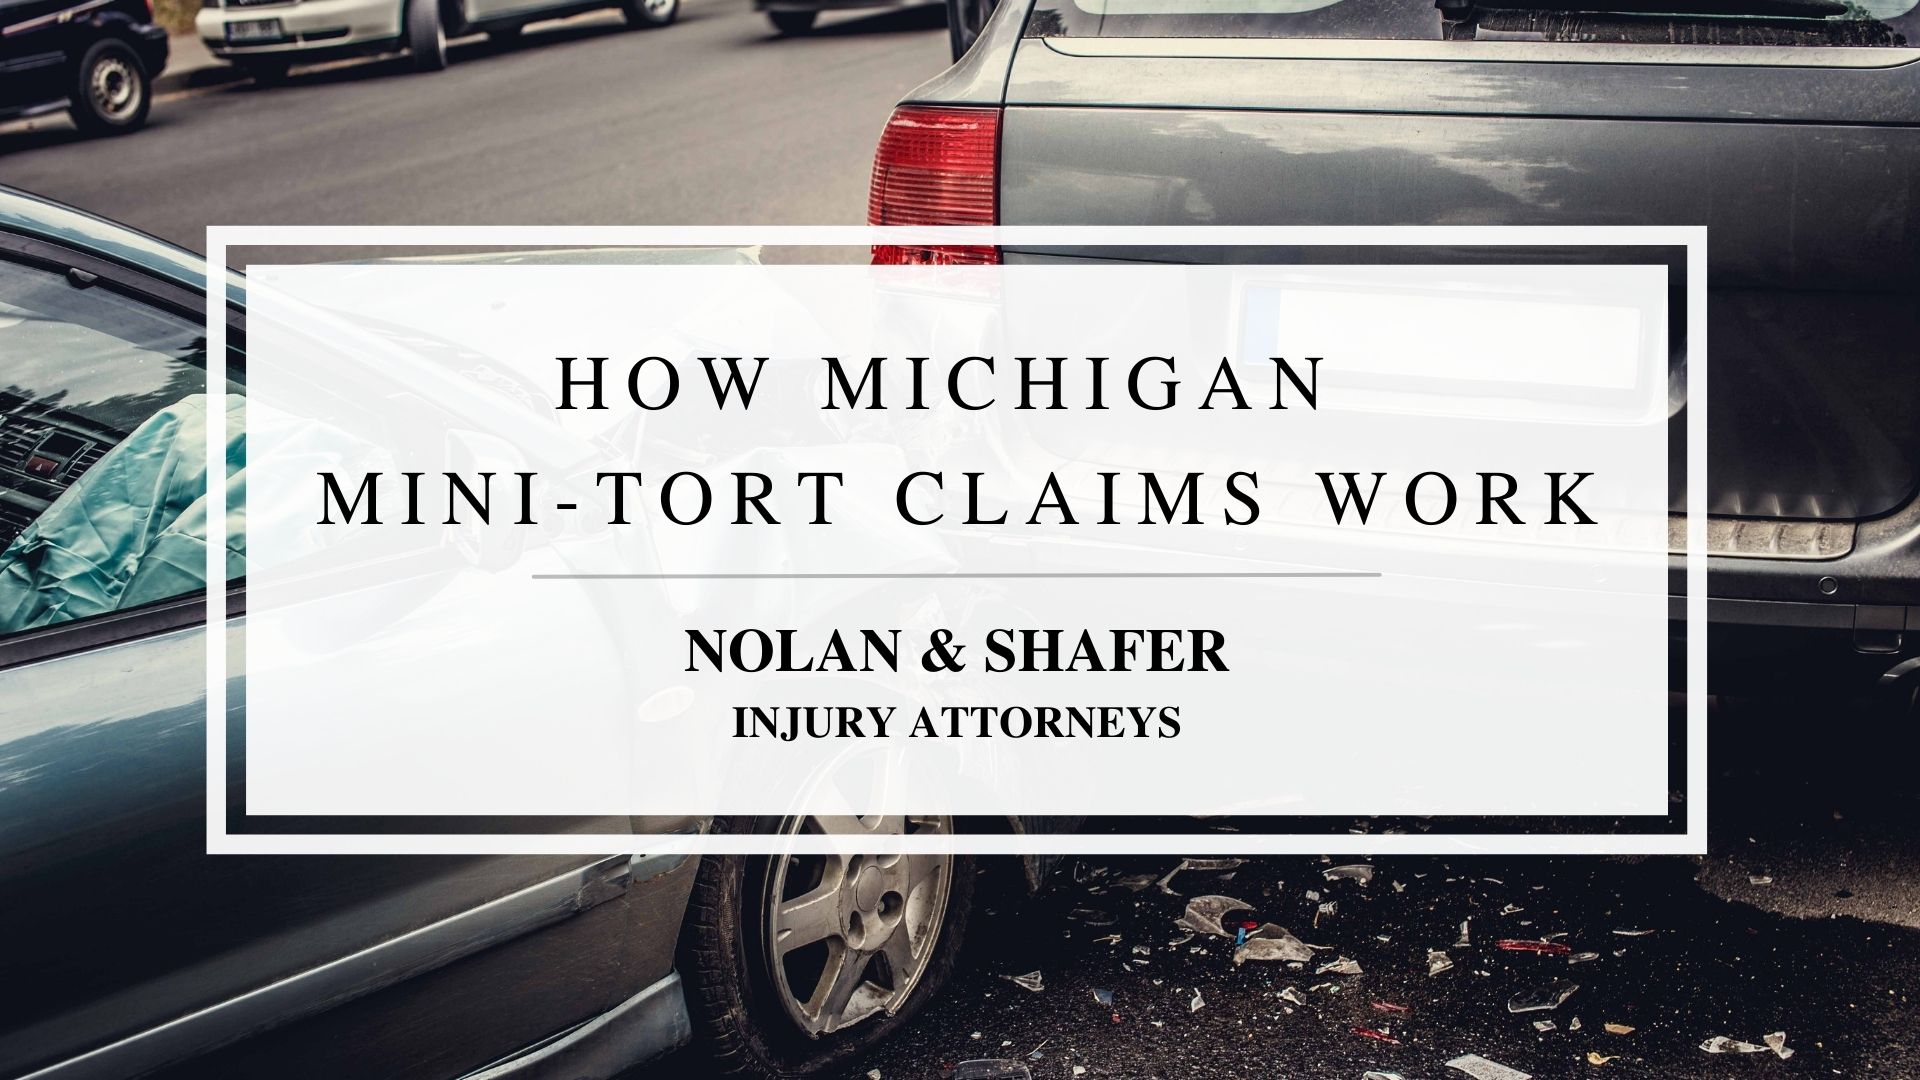 Featured image of how Michigan mini-tort claims work